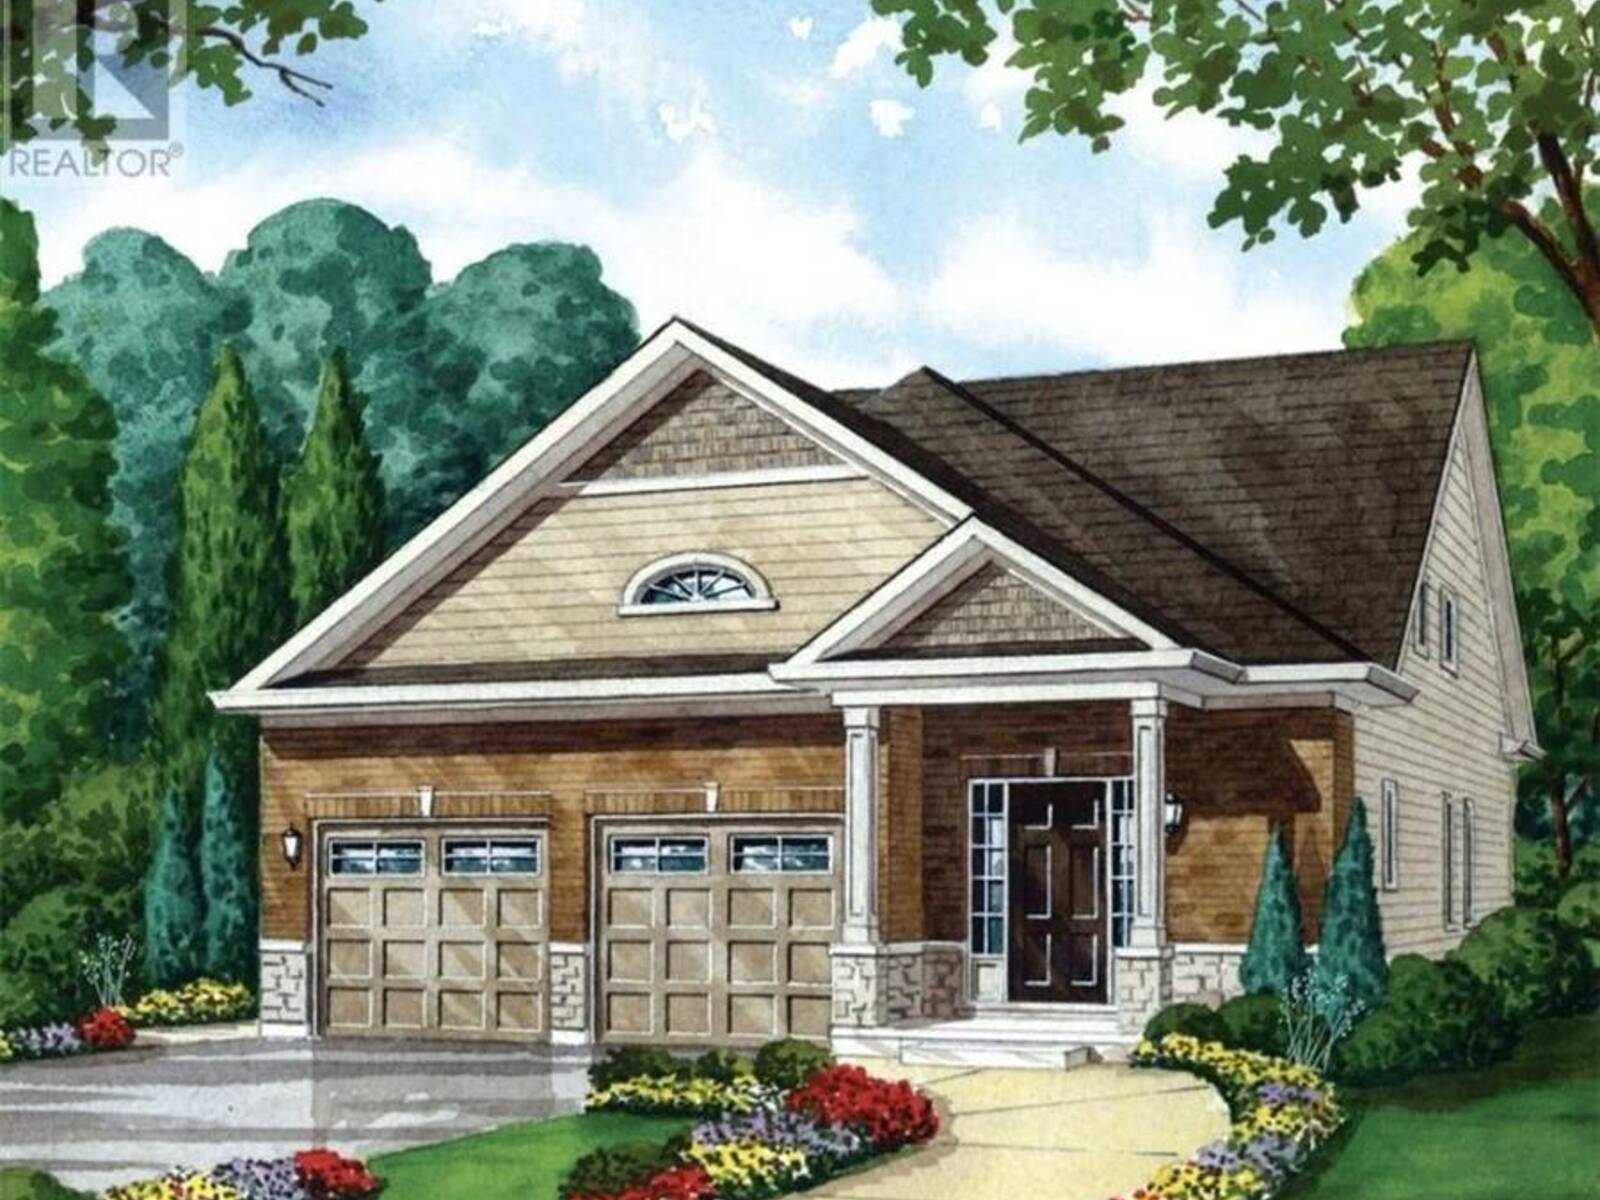 LOT 12 BURWELL Street, Fort Erie, Ontario L2A 0E2